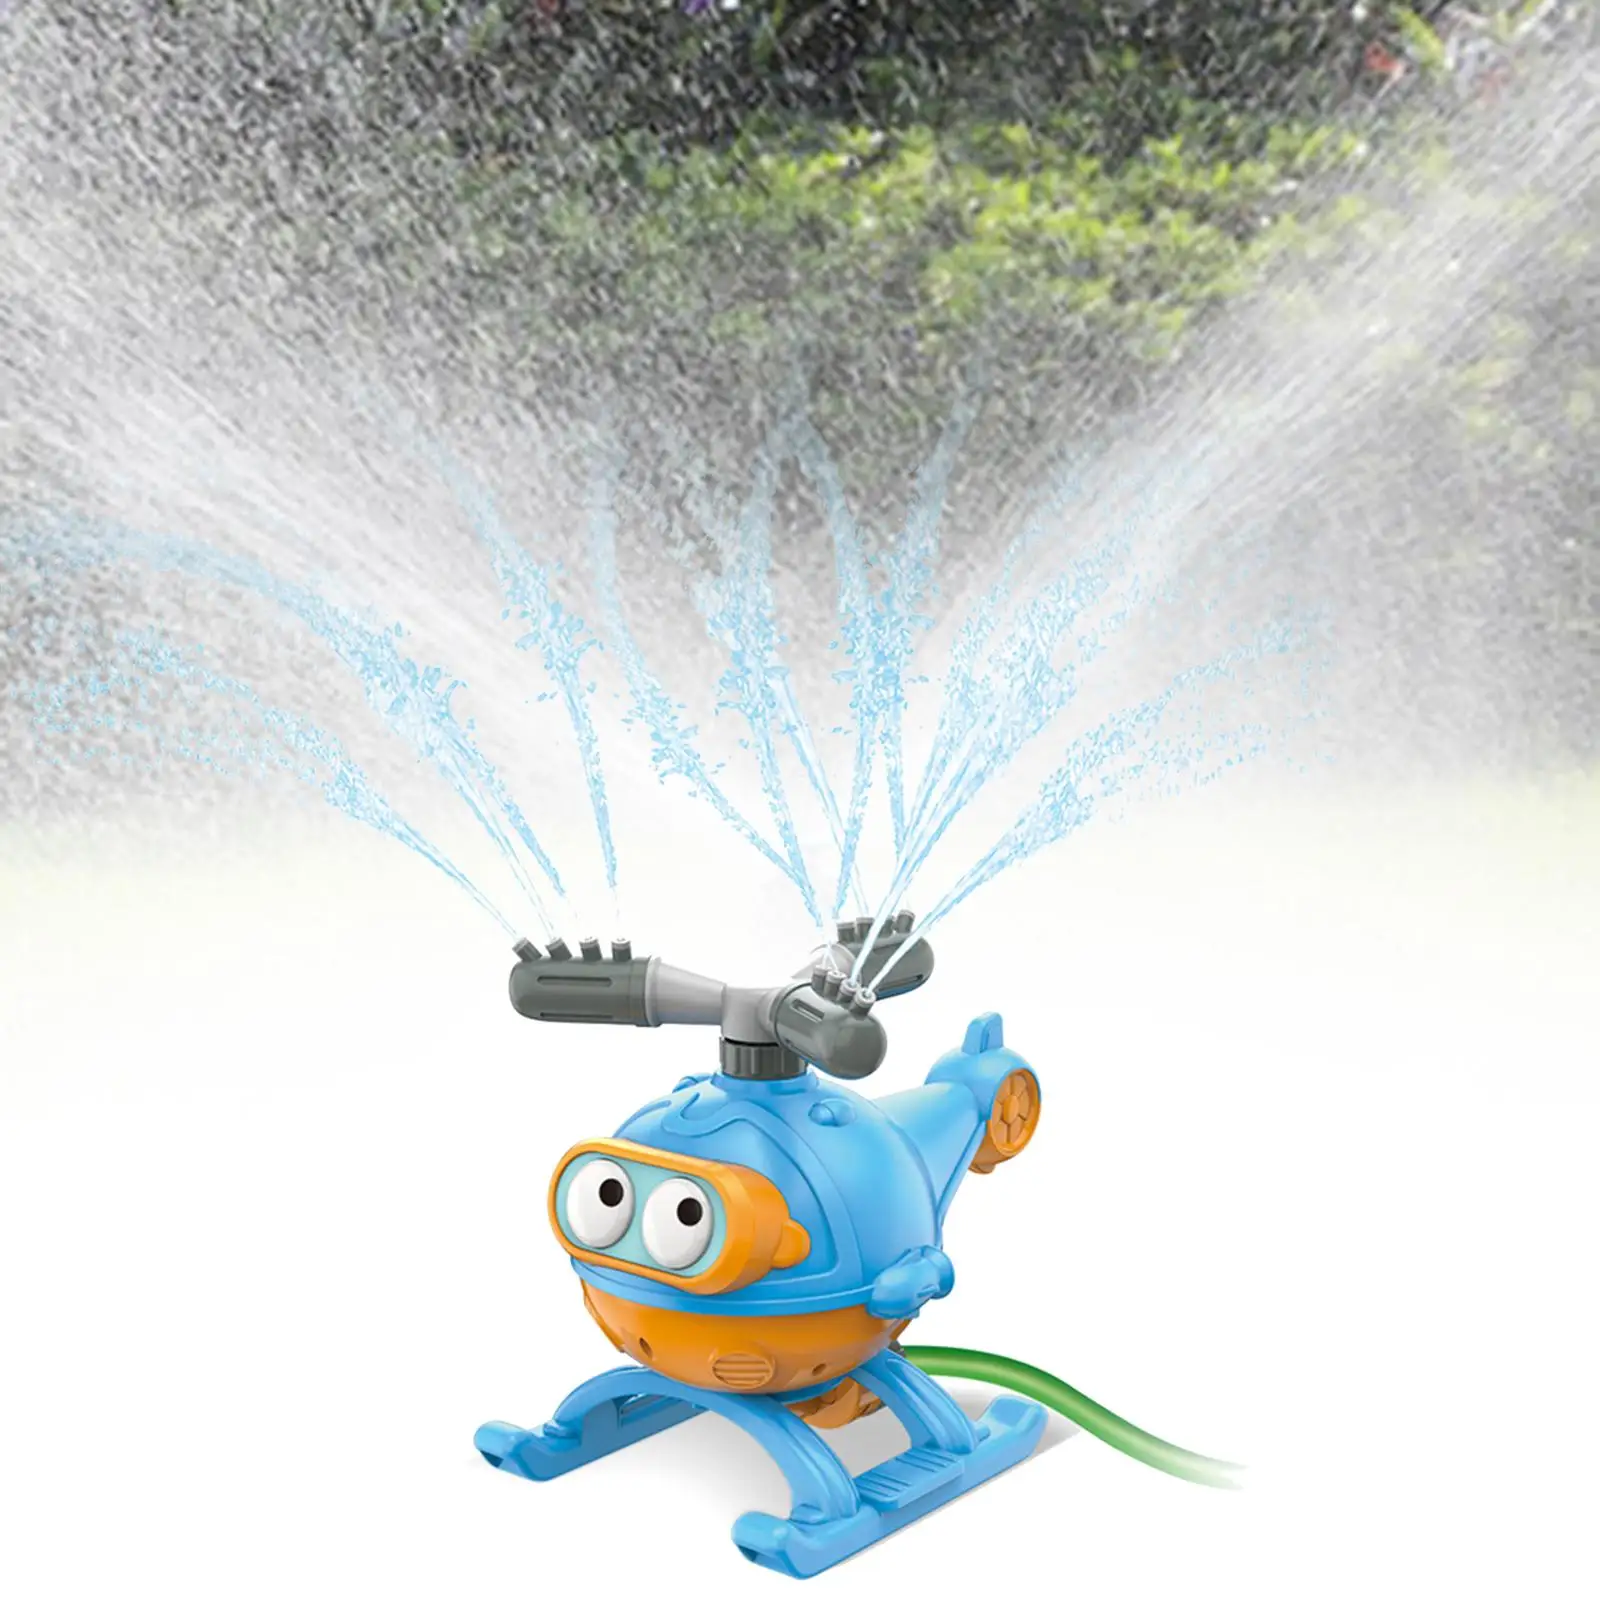 Helicopter Water Toys Backyard Game with 12 Nozzles Summer Water Sprayer Toy for Birthday Gift Parties Pool Backyard Boys Girls